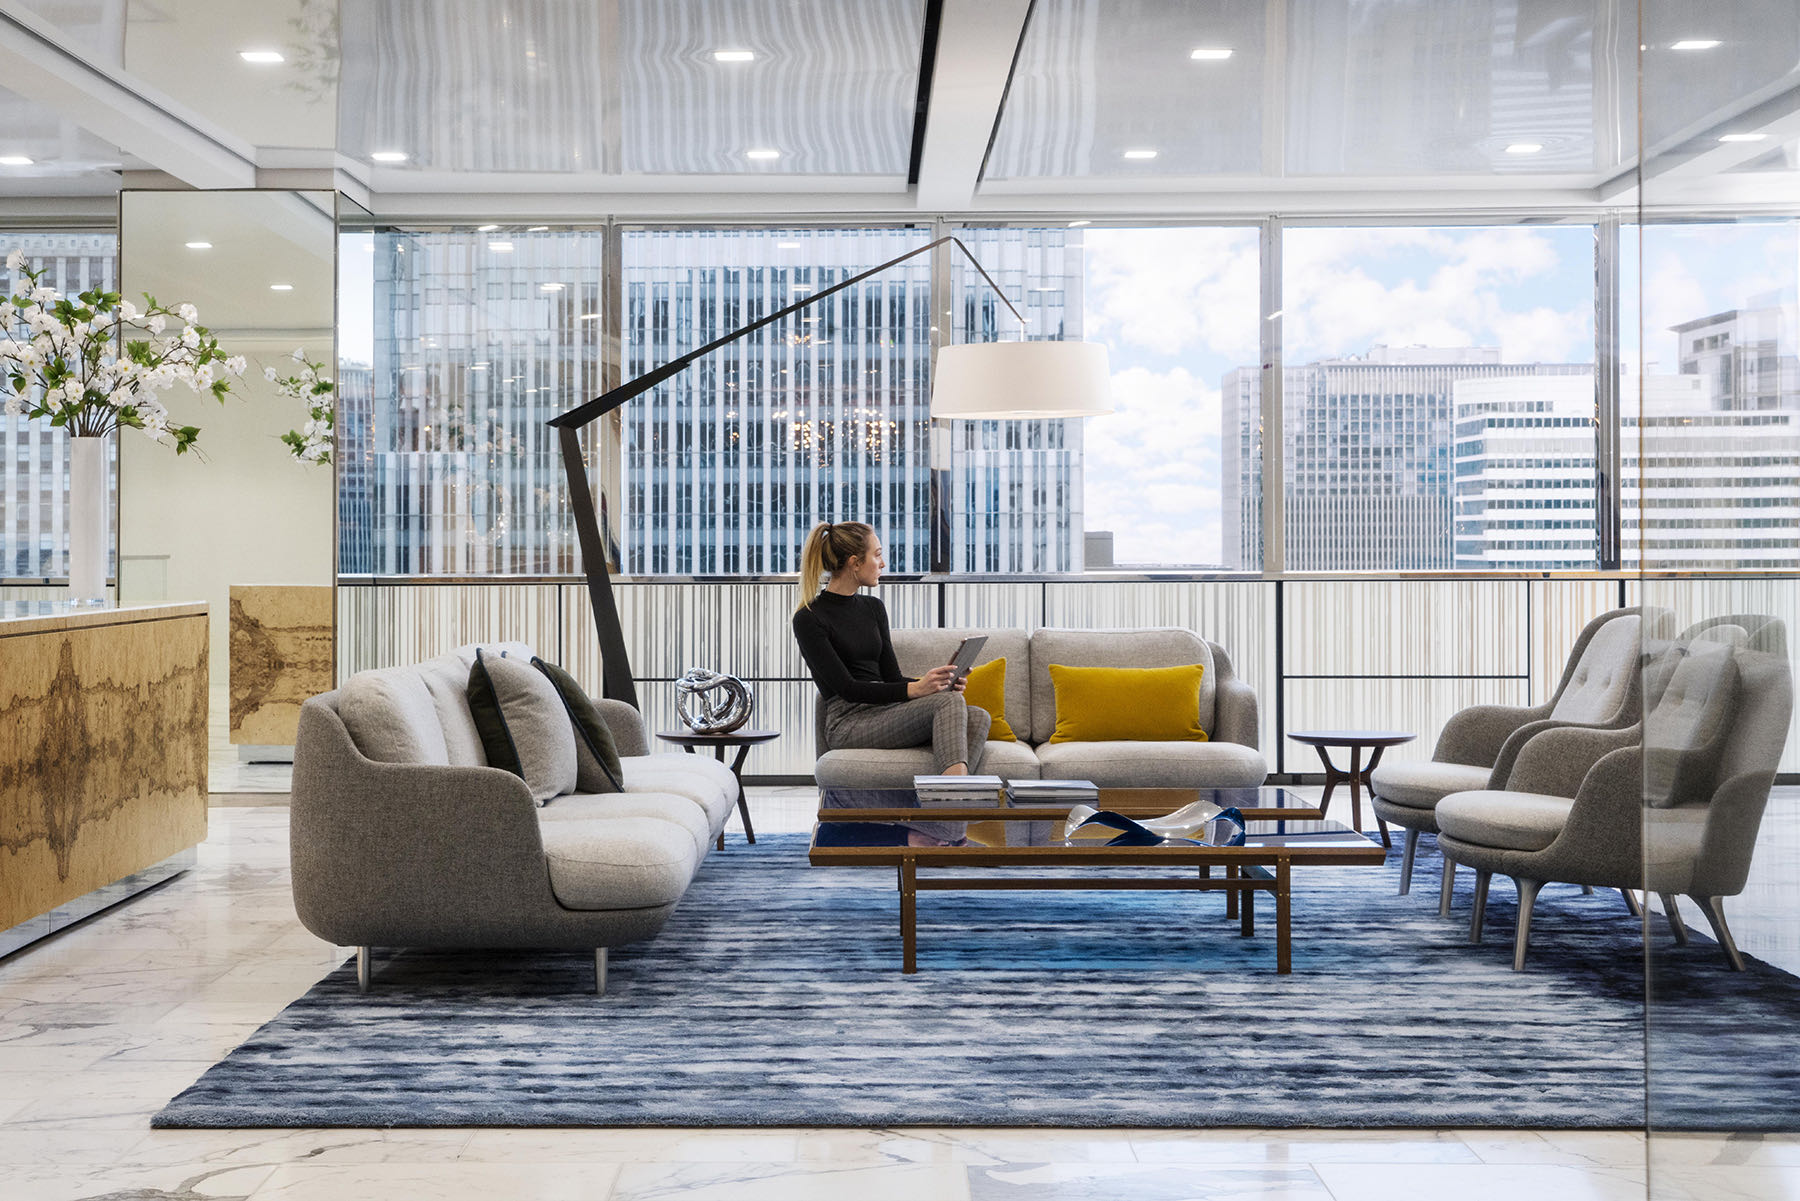 A Look Inside Charles River Associates’ New Chicago Office